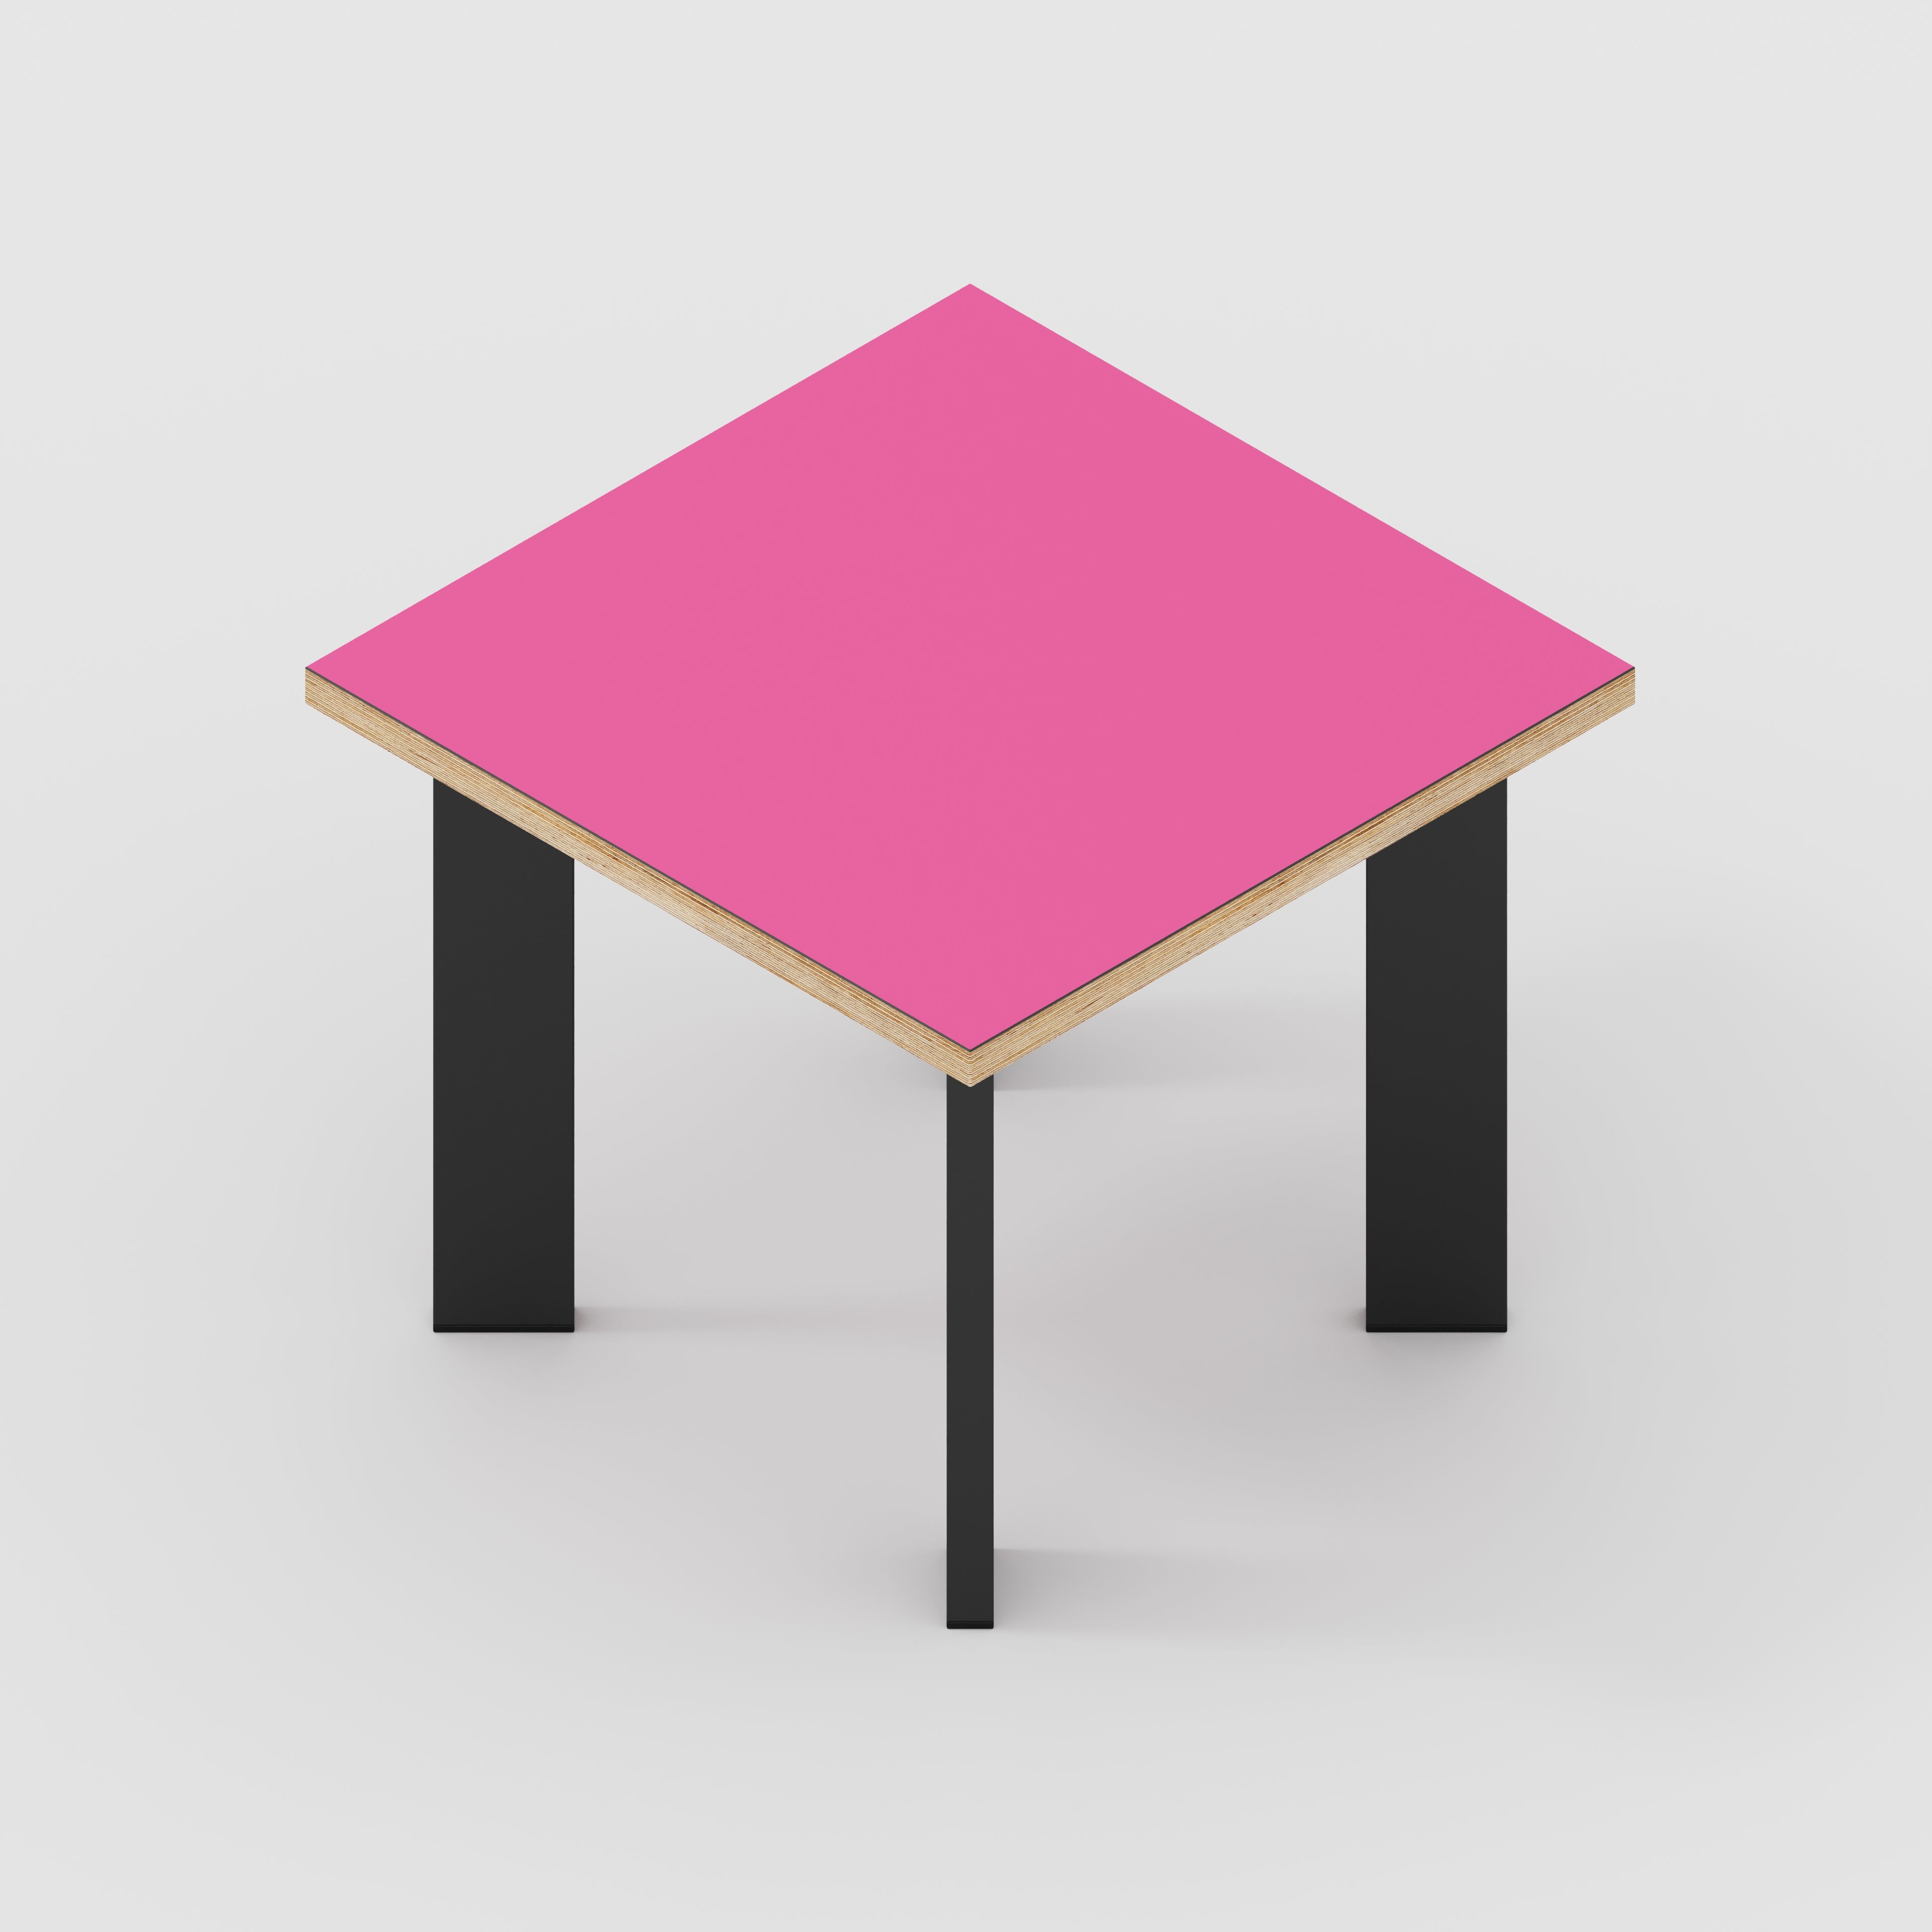 Side Table with Rectangular Single Pin Legs - Formica Juicy Pink - 500(w) x 500(d) x 425(h)